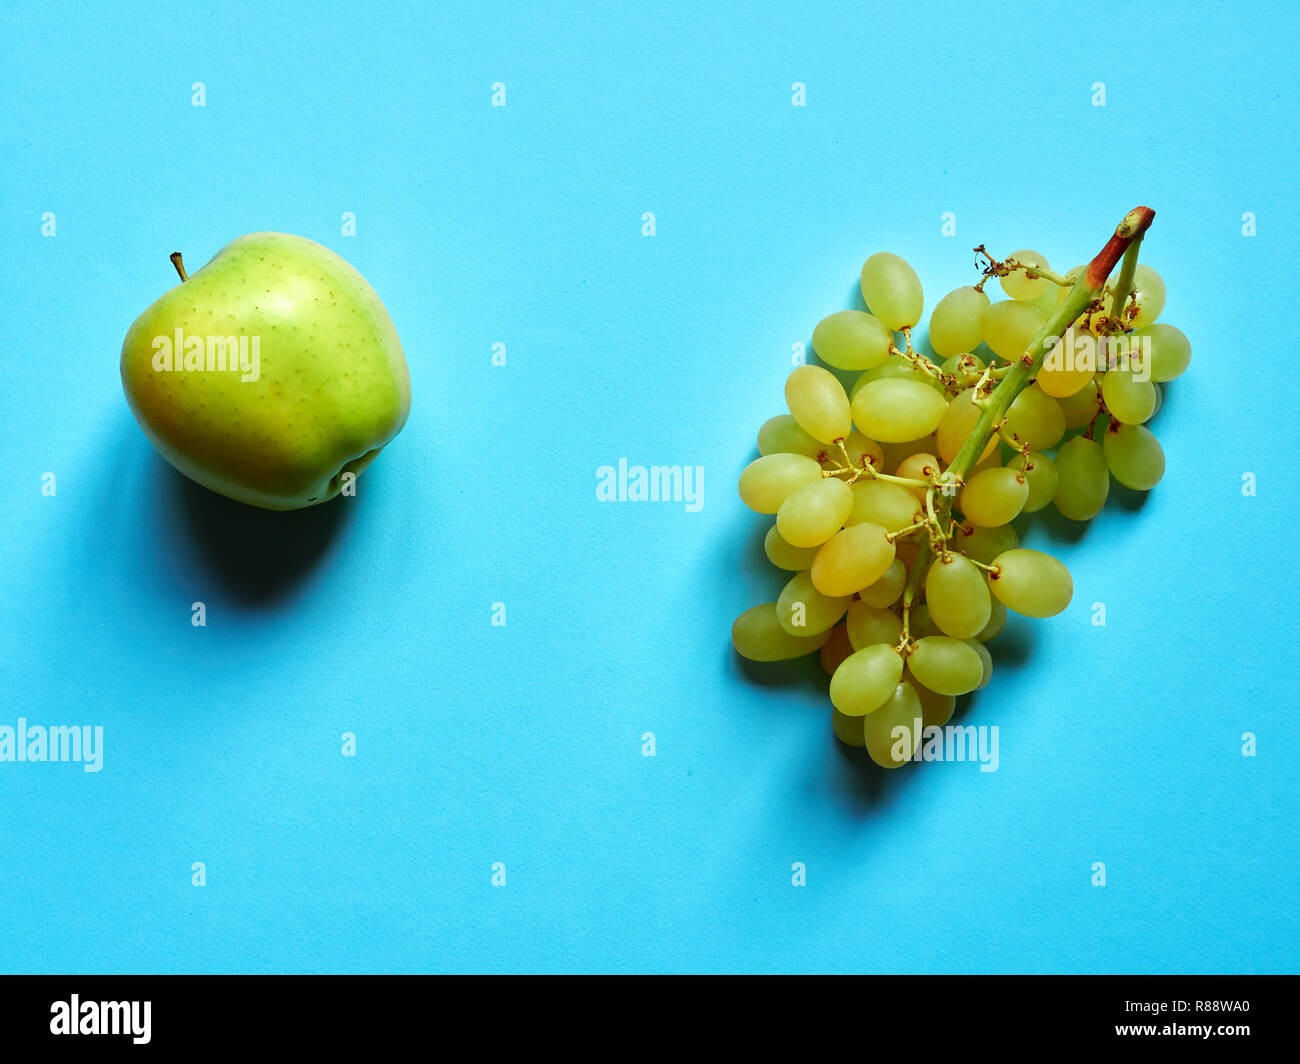 Green apple and bunch of green grapes isolated in studio against a blue background viewed from above Stock Photo